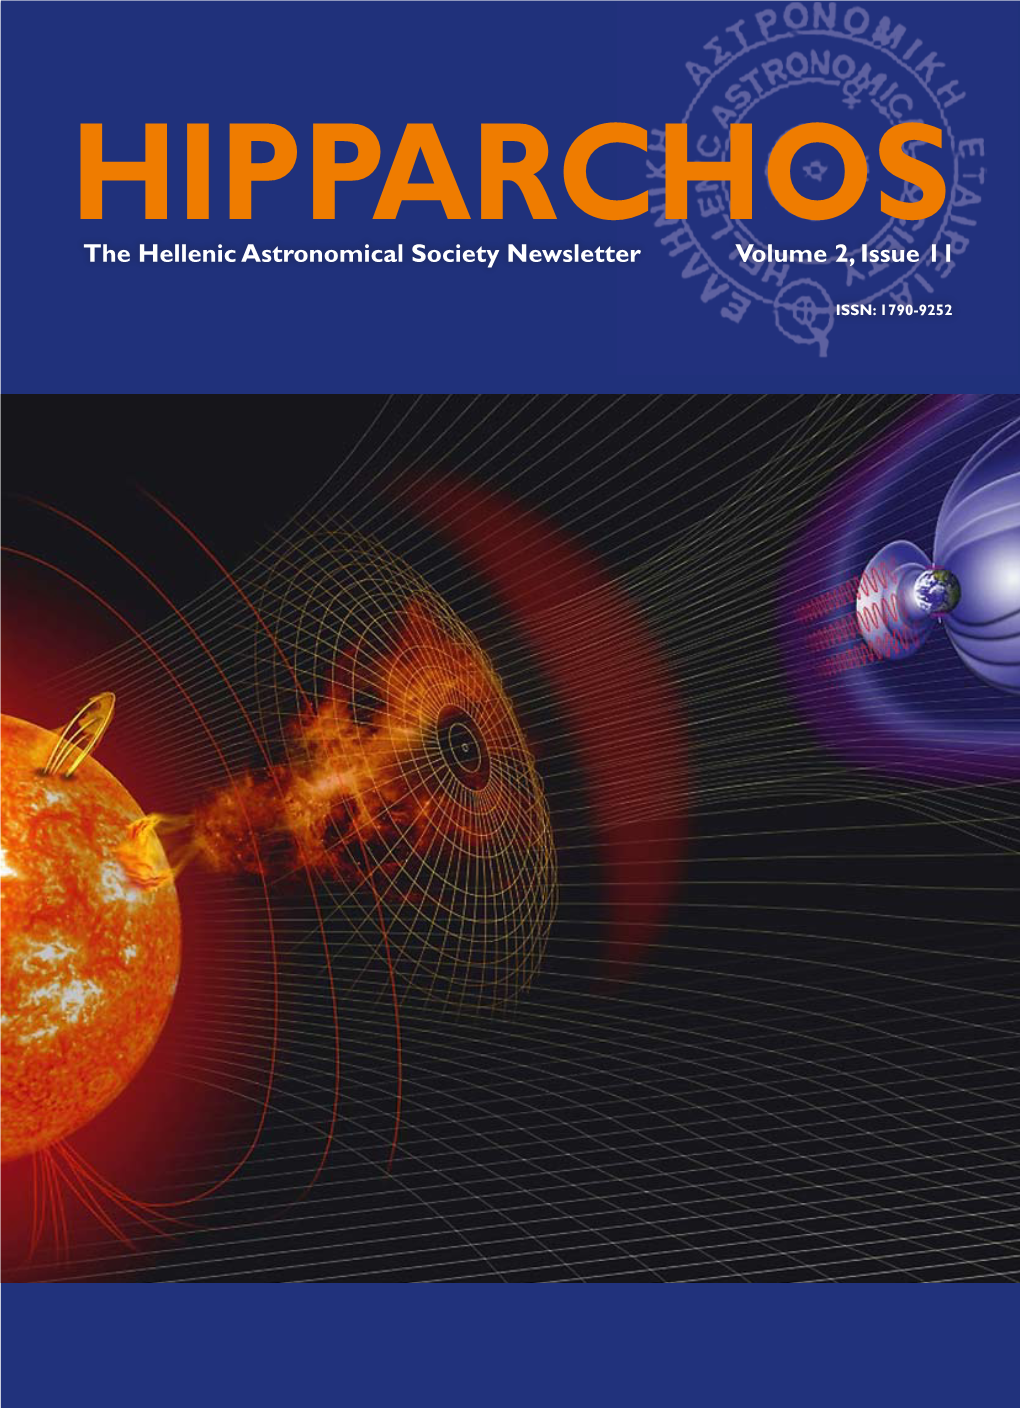 HIPPARCHOSHIPPARCHOS the Hellenic Astronomical Society Newsletter Volume 2, Issue 11